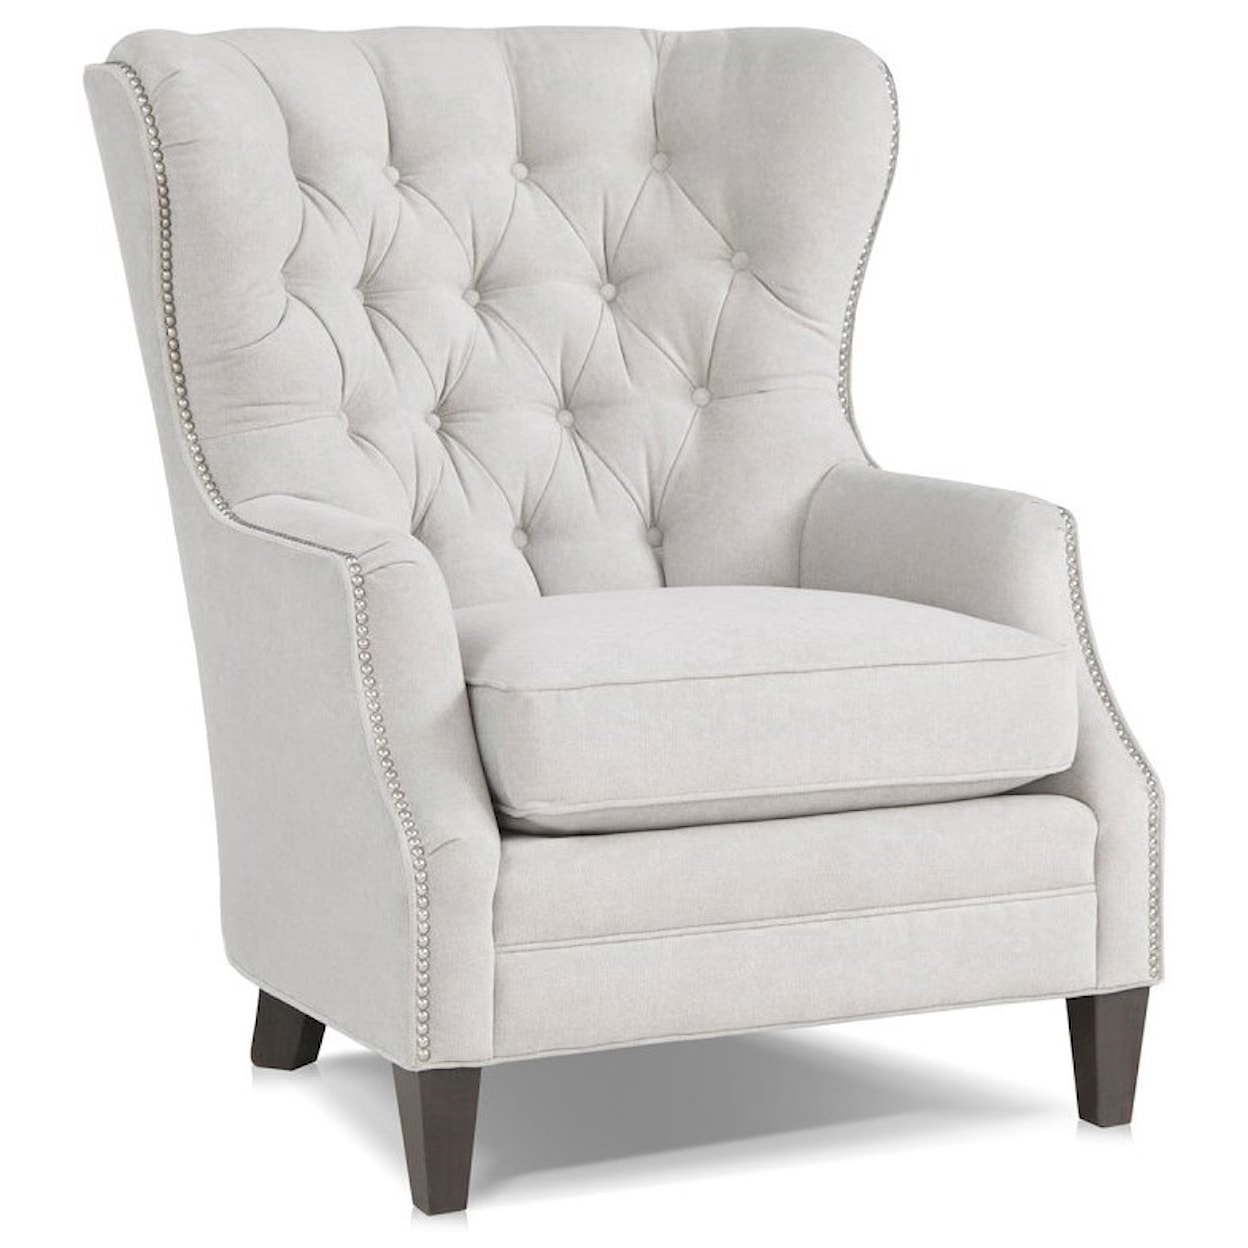 Smith Brothers 527 Chair